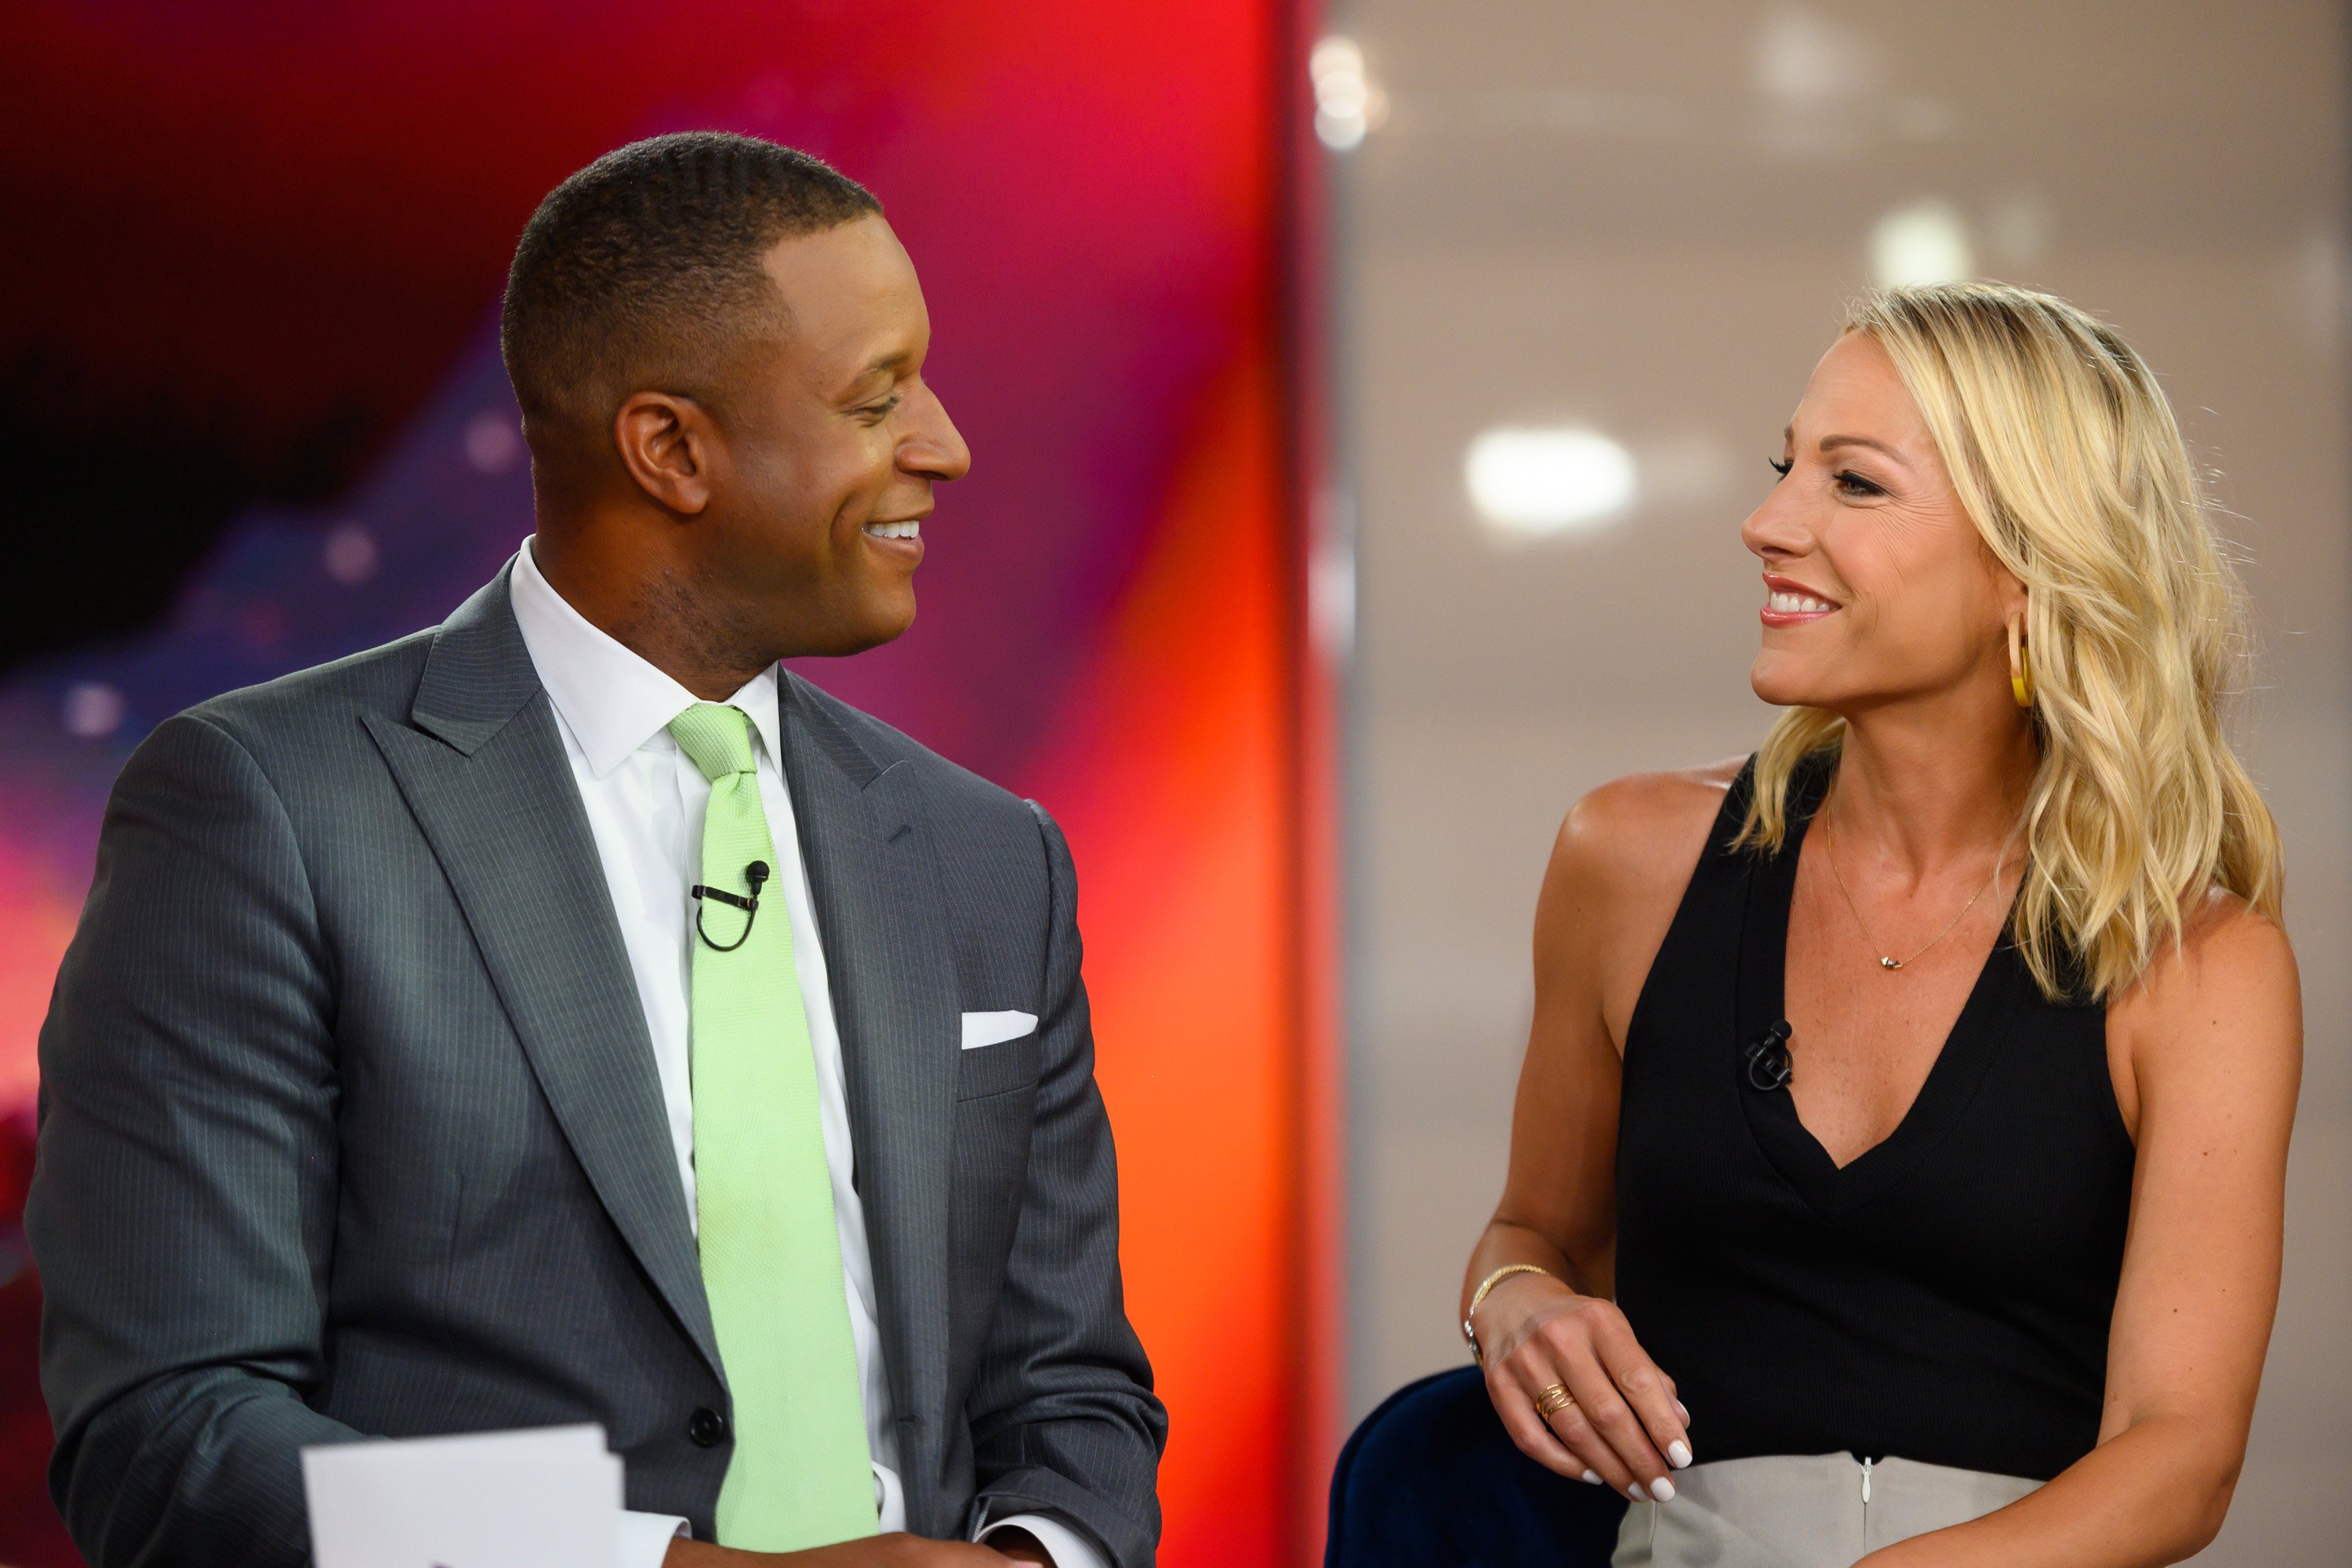 Craig Melvin and Lindsay Czarniak photographed on the set of NBC in 2019. | Source: Getty Images